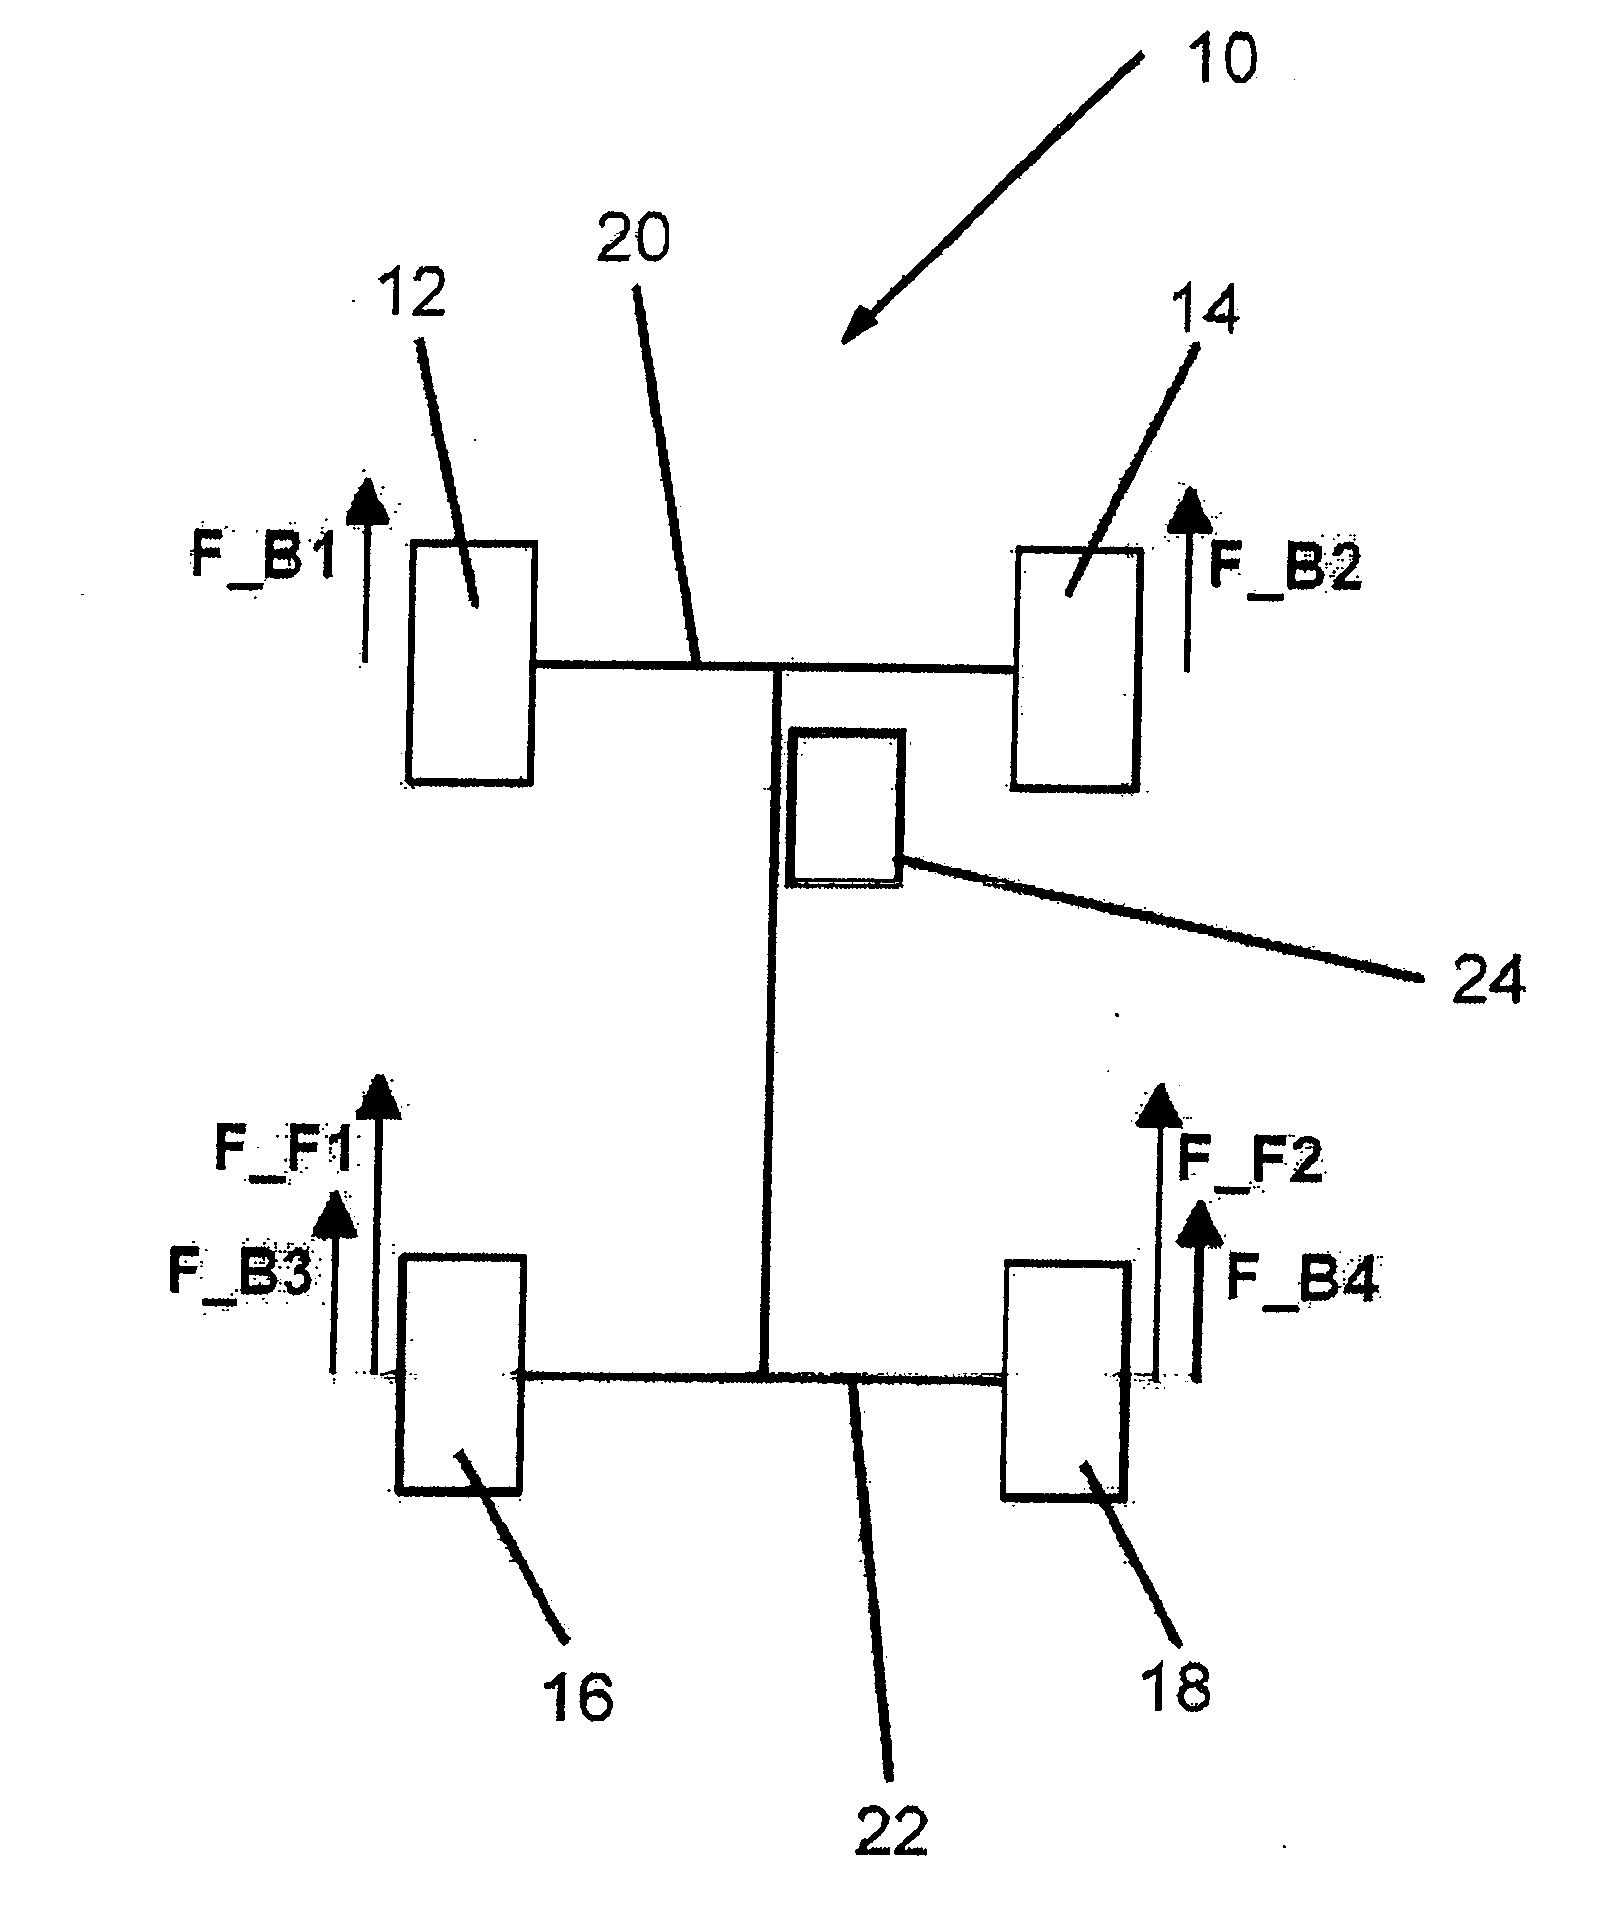 Method for stabilizing a motor vehicle whose speed is reduced to a rest position and brake system for carrying out said method